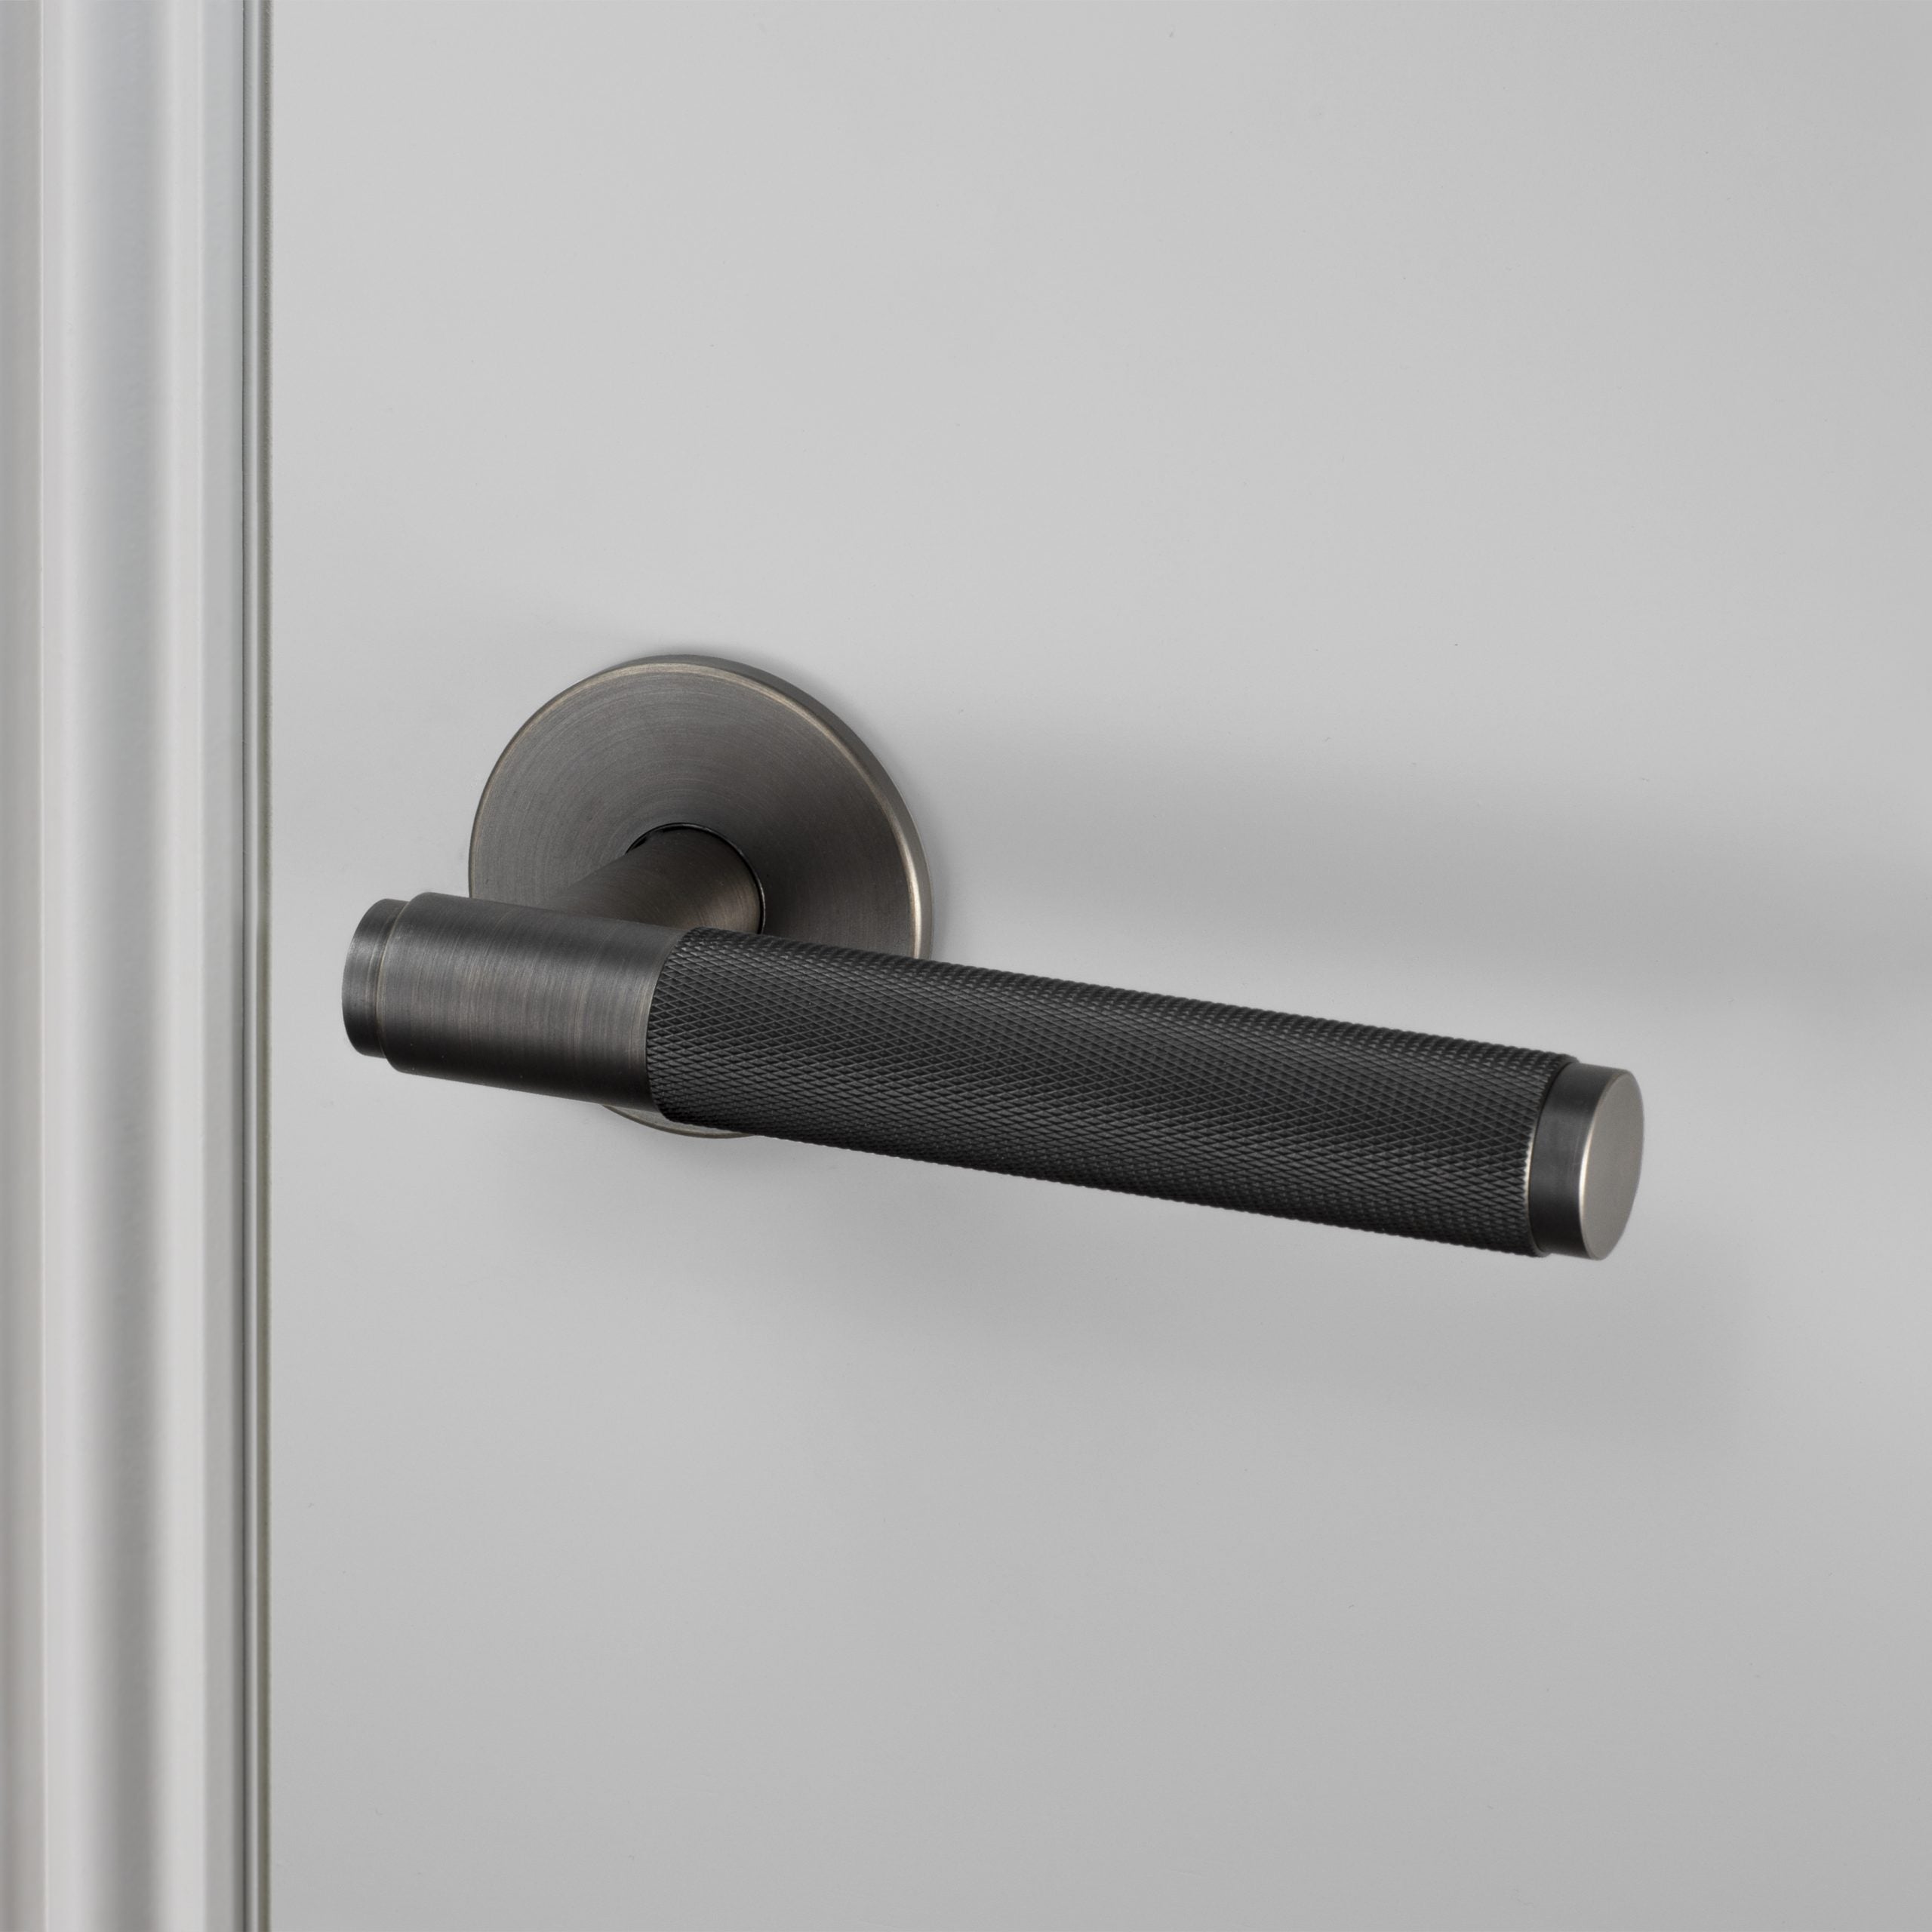 Buster + Punch Conventional Door Handle, Cross Design - FIXED TYPE Hardware Buster + Punch Smoked Bronze  